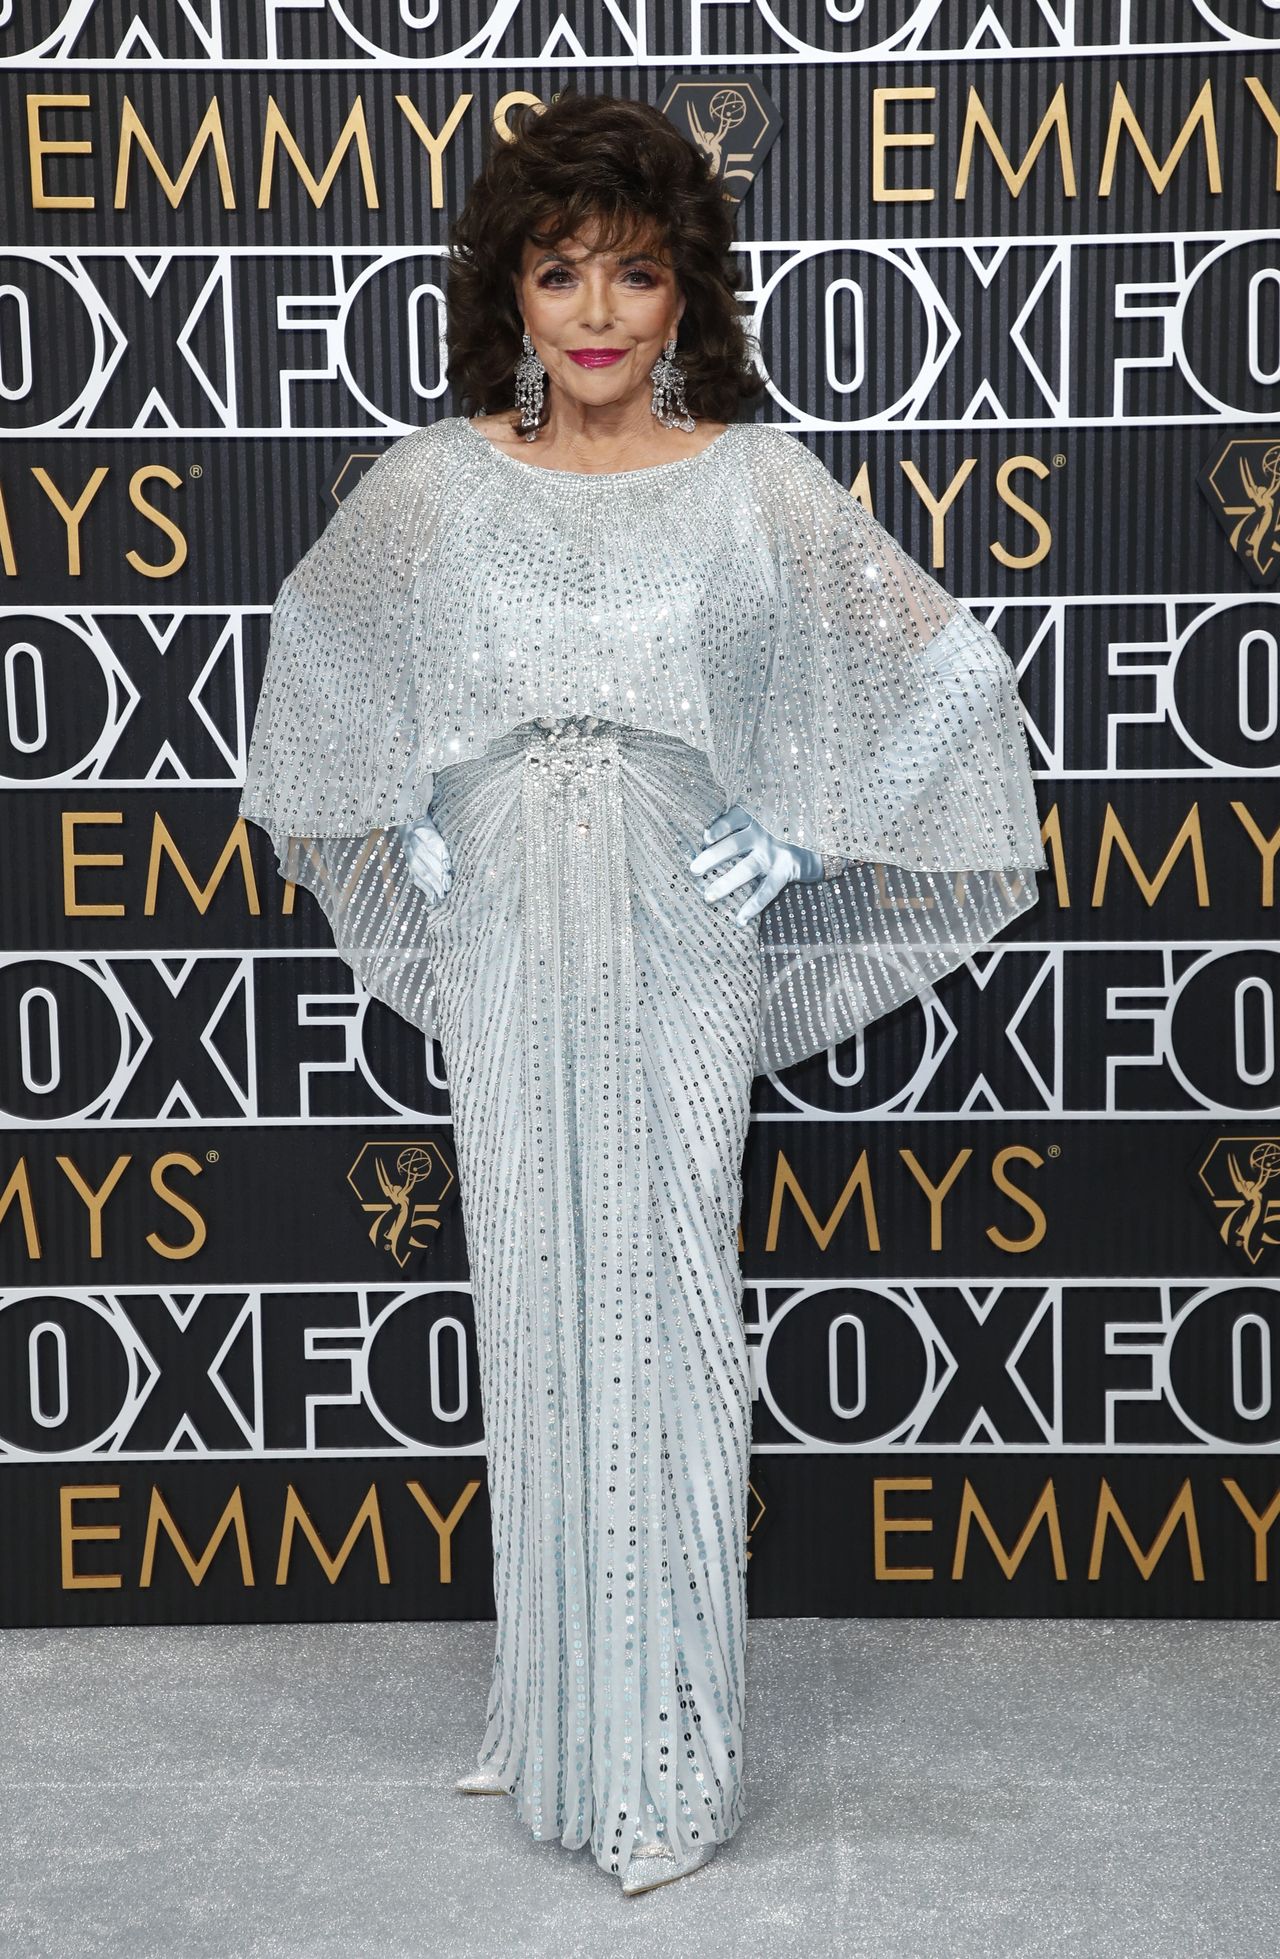 Joan Collins at the Emmy gala